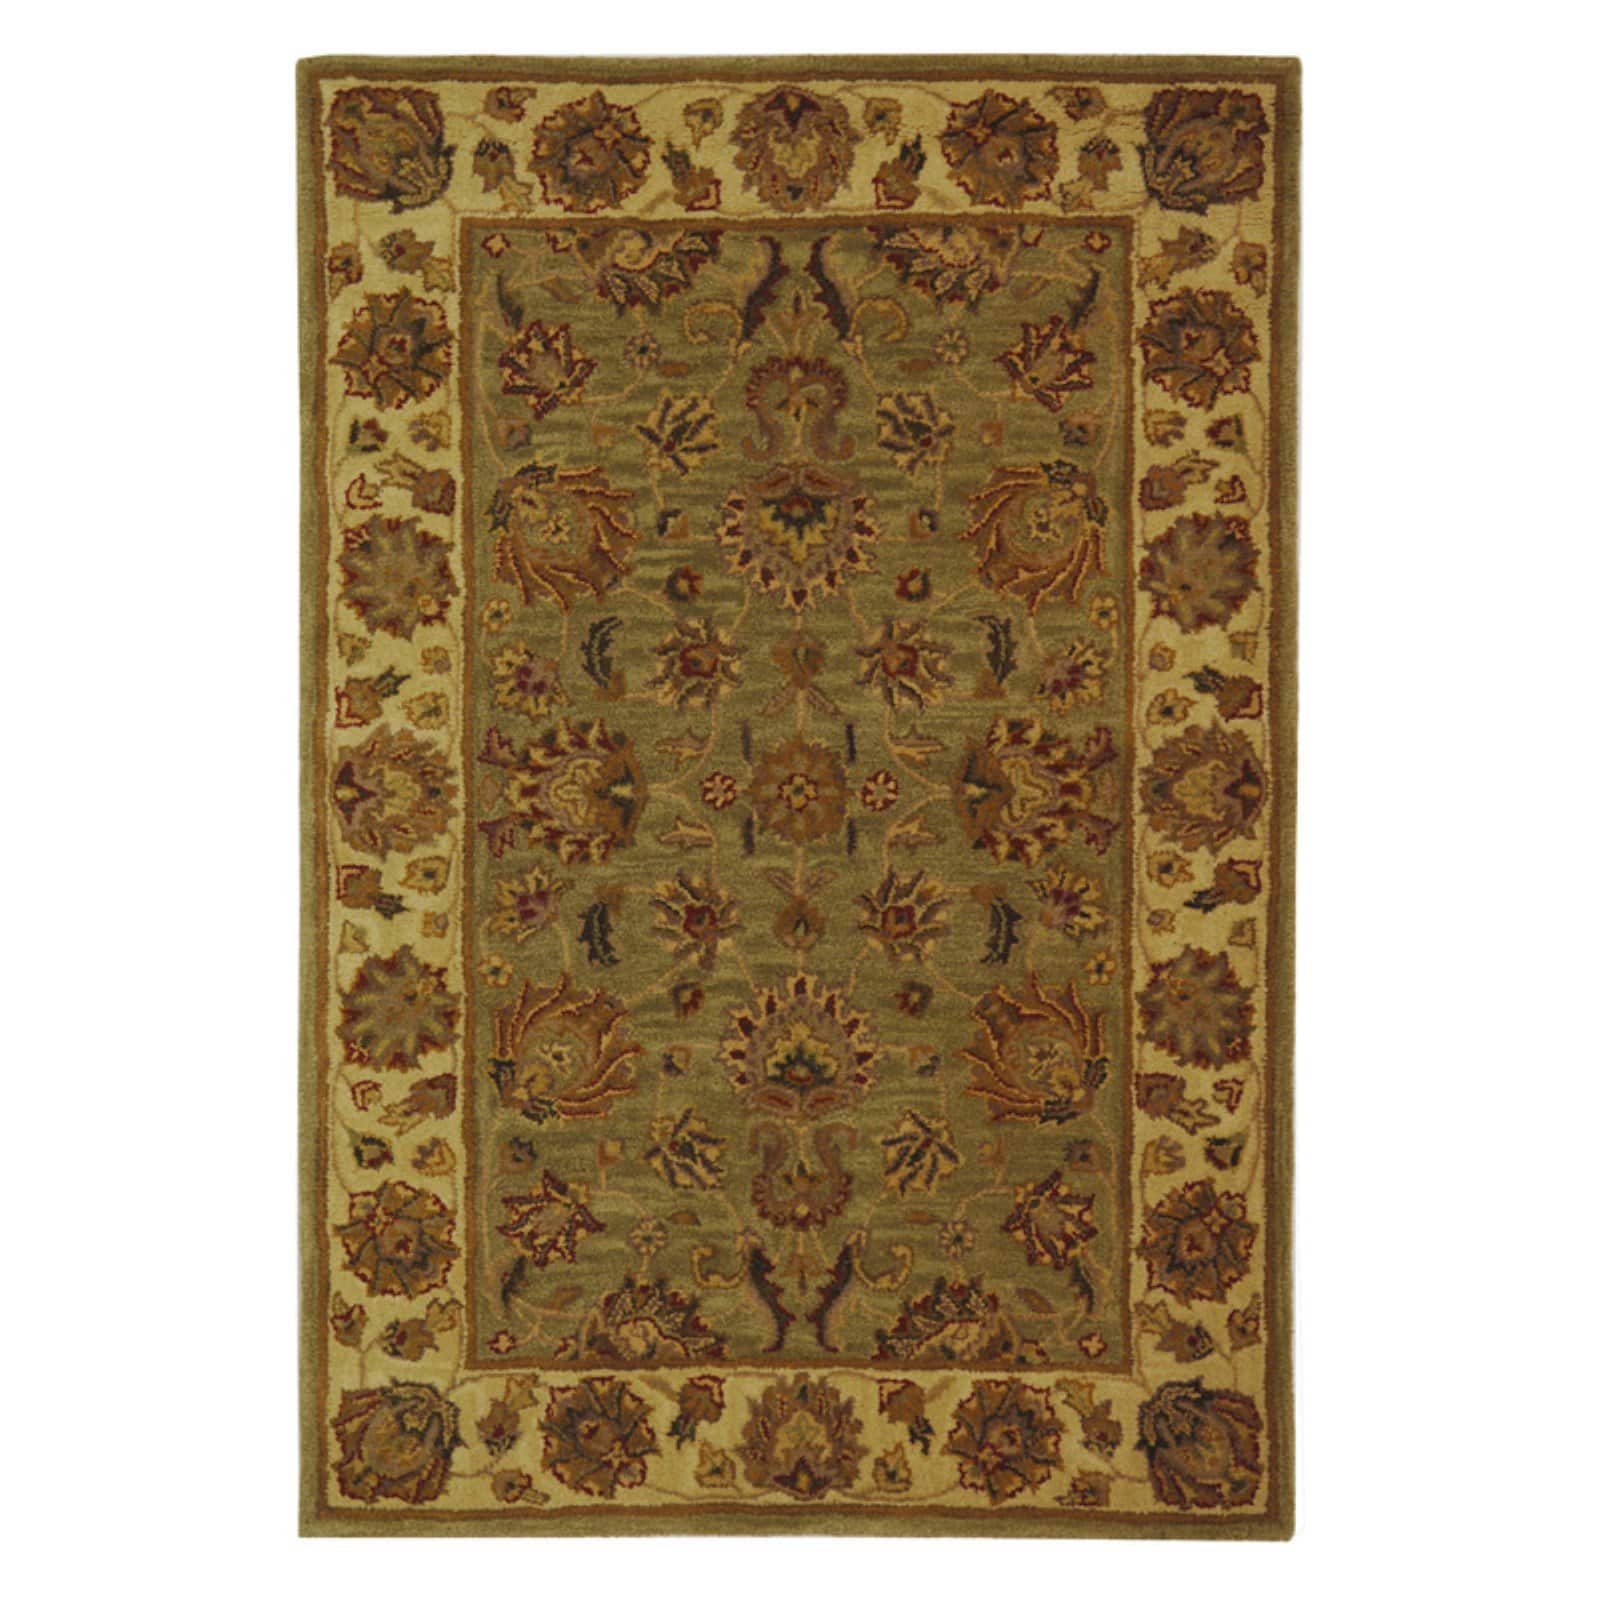 SAFAVIEH Heritage Regis Traditional Wool Area Rug, Green/Gold, 6' x 6' Round - image 5 of 10